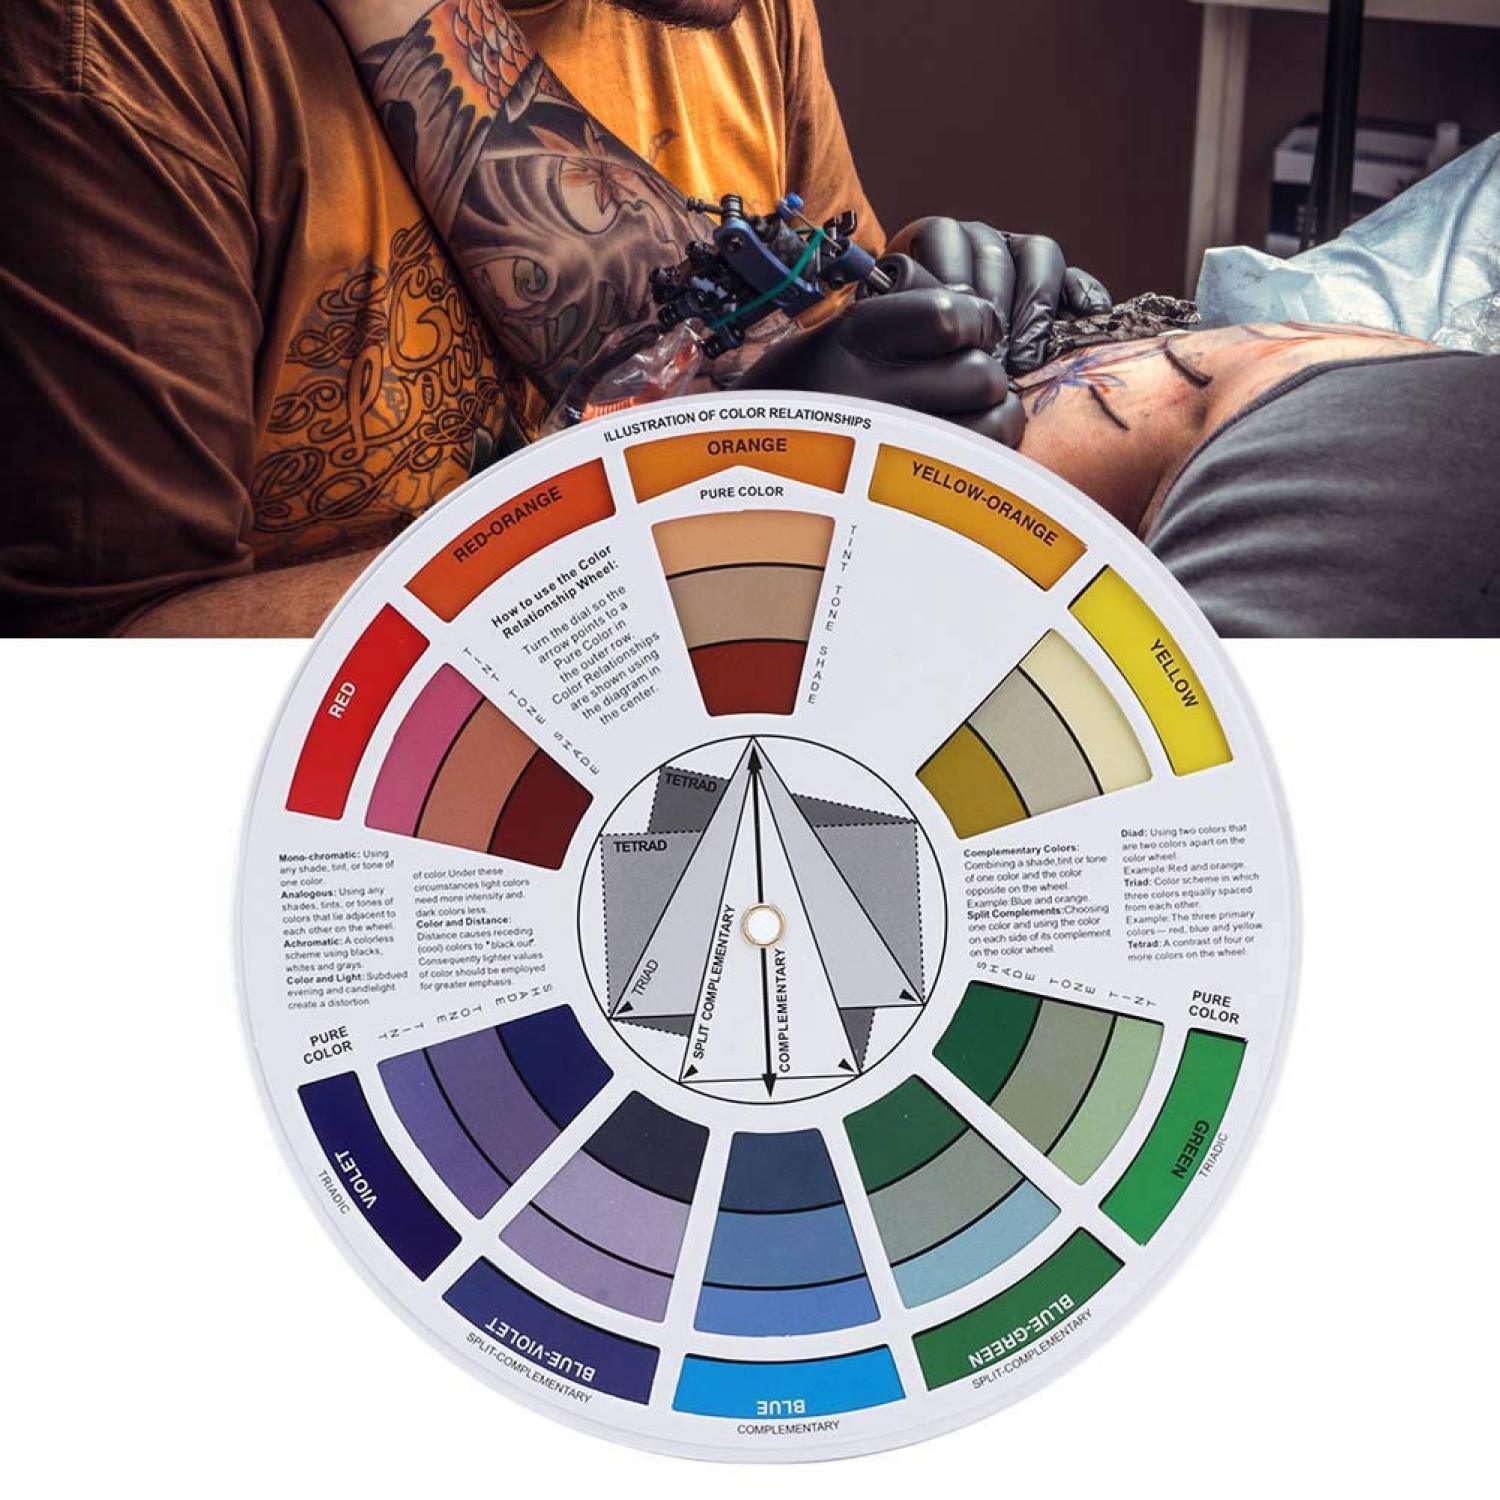 Tattoo Pigment Color Wheel Chart Mix Guide Supplies Multicolour price in  UAE  Noon UAE  kanbkam